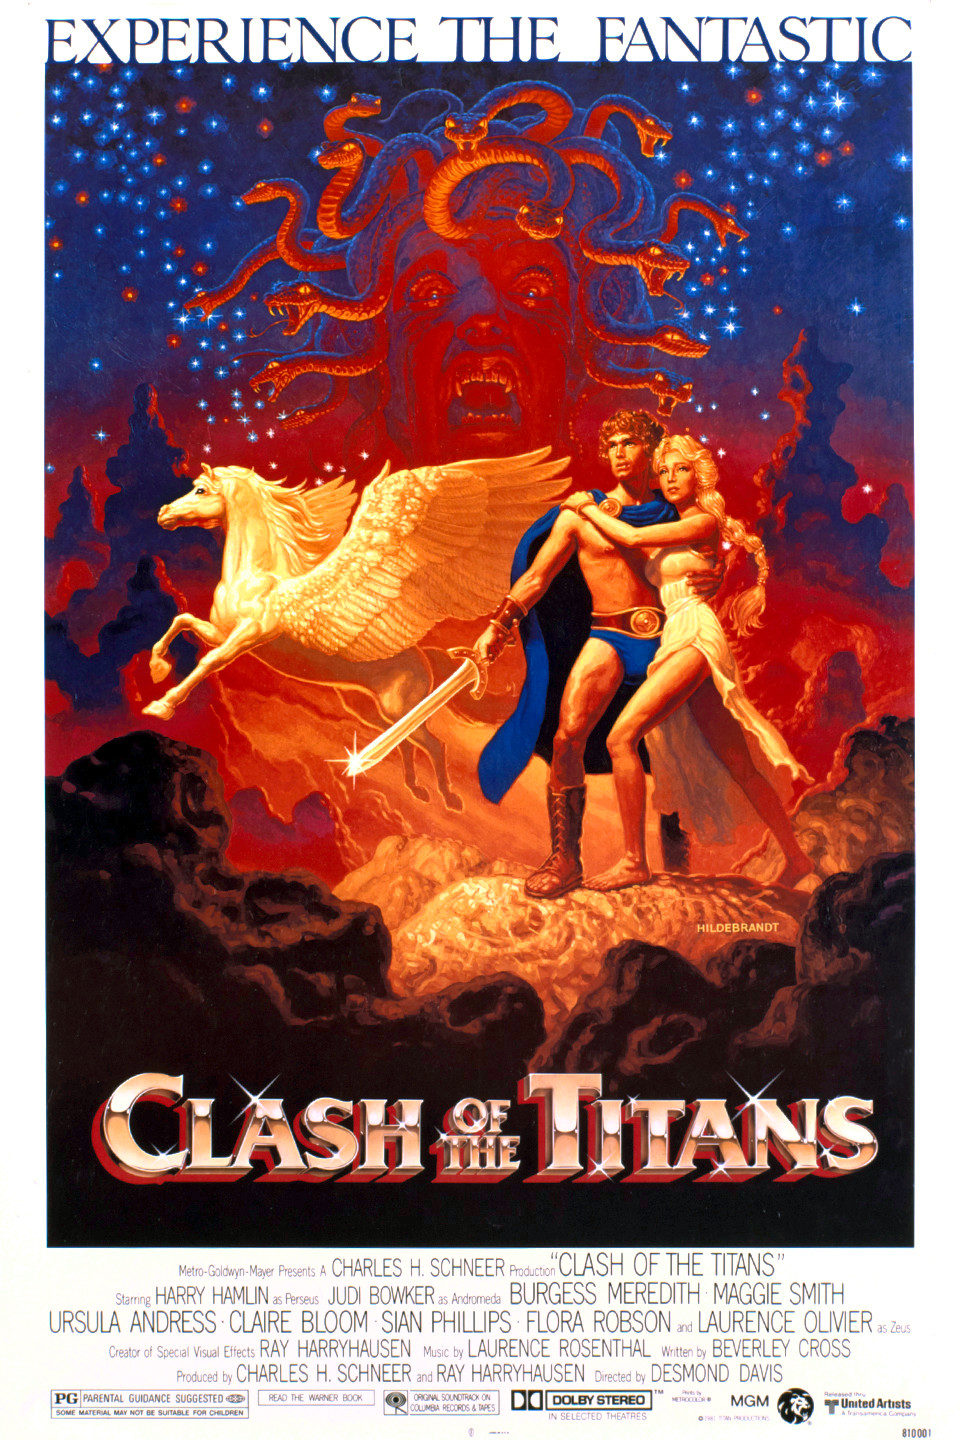 Wrath of the Titans 3D Tickets & Showtimes